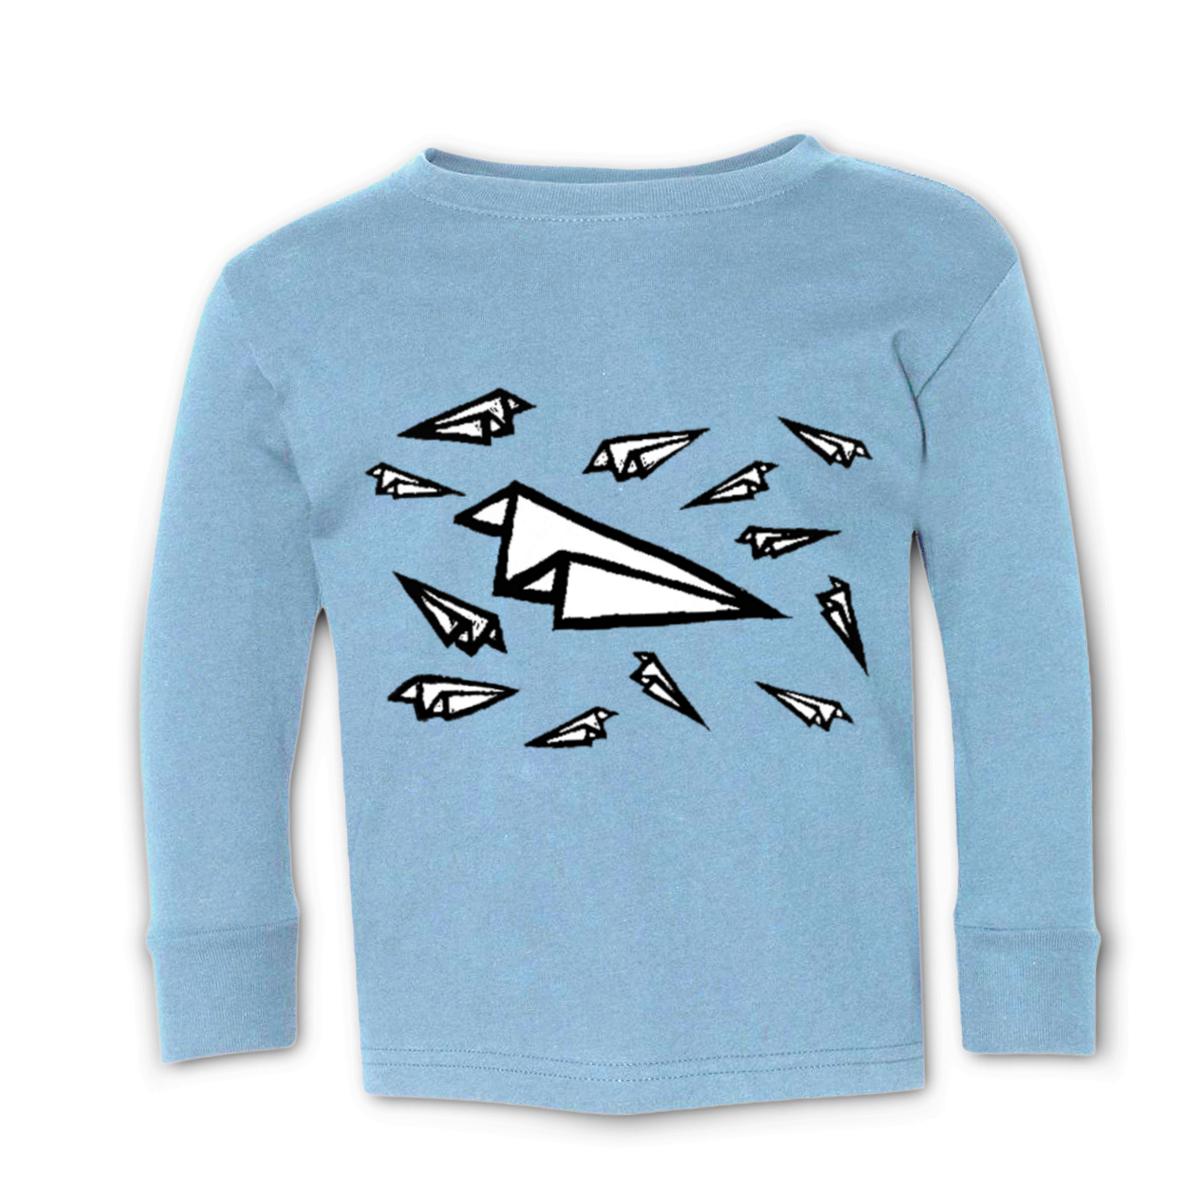 Airplane Frenzy Toddler Long Sleeve Tee 2T light-blue